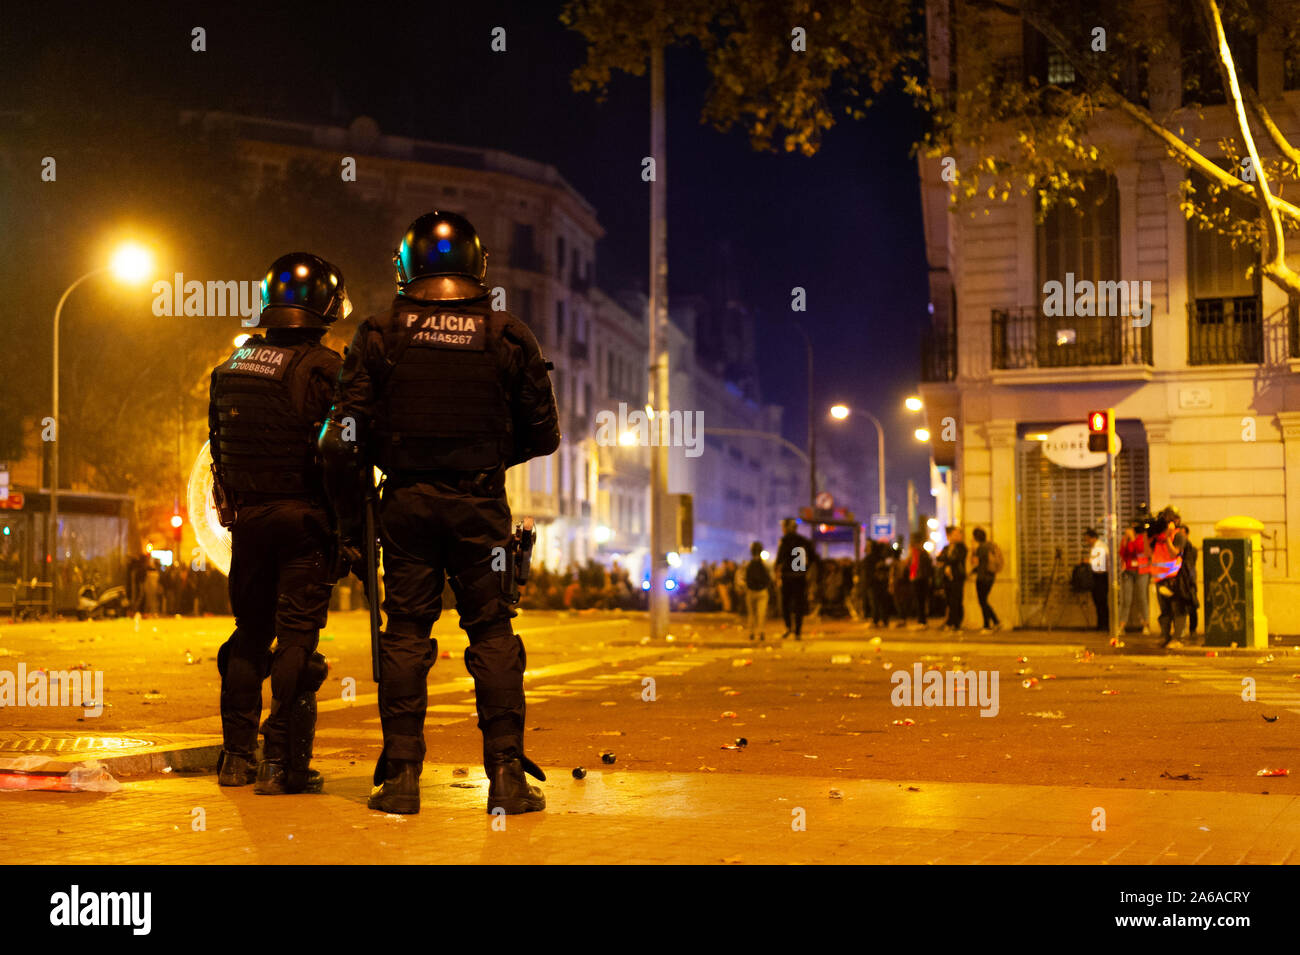 Barcelona, Spain - 18 october 2019: mossos d'esquadra in urquinaona square catalan police with guns confront with protesters at night during clashes w Stock Photo